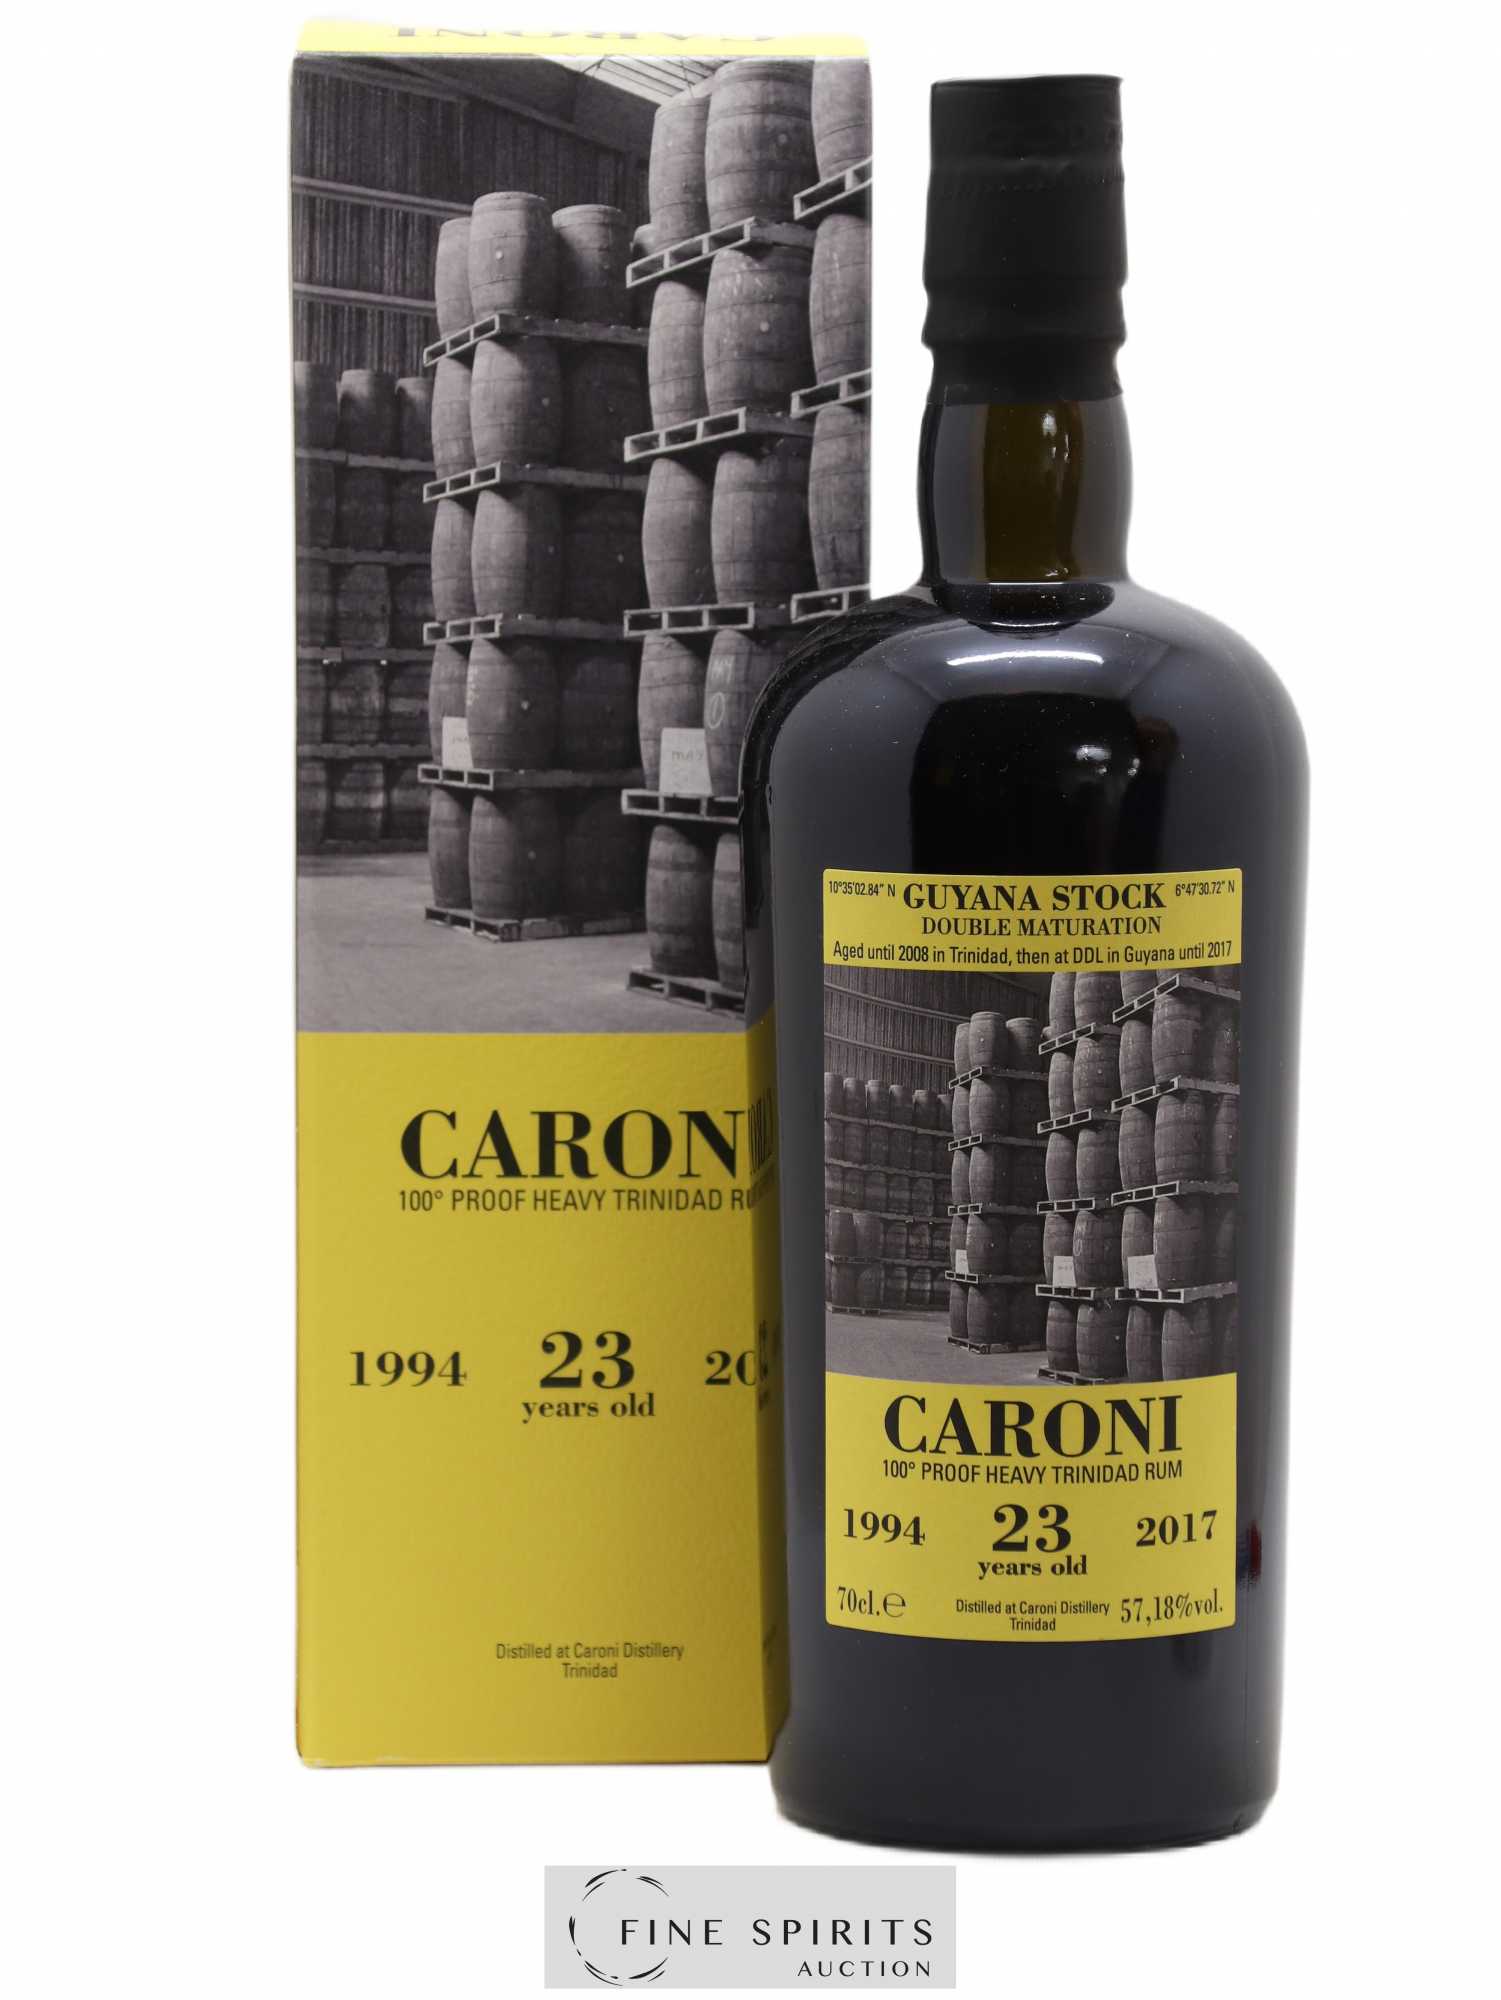 Caroni 23 years 1994 Velier 36th Release Double Maturation - bottled 2017 Guyana Stock 